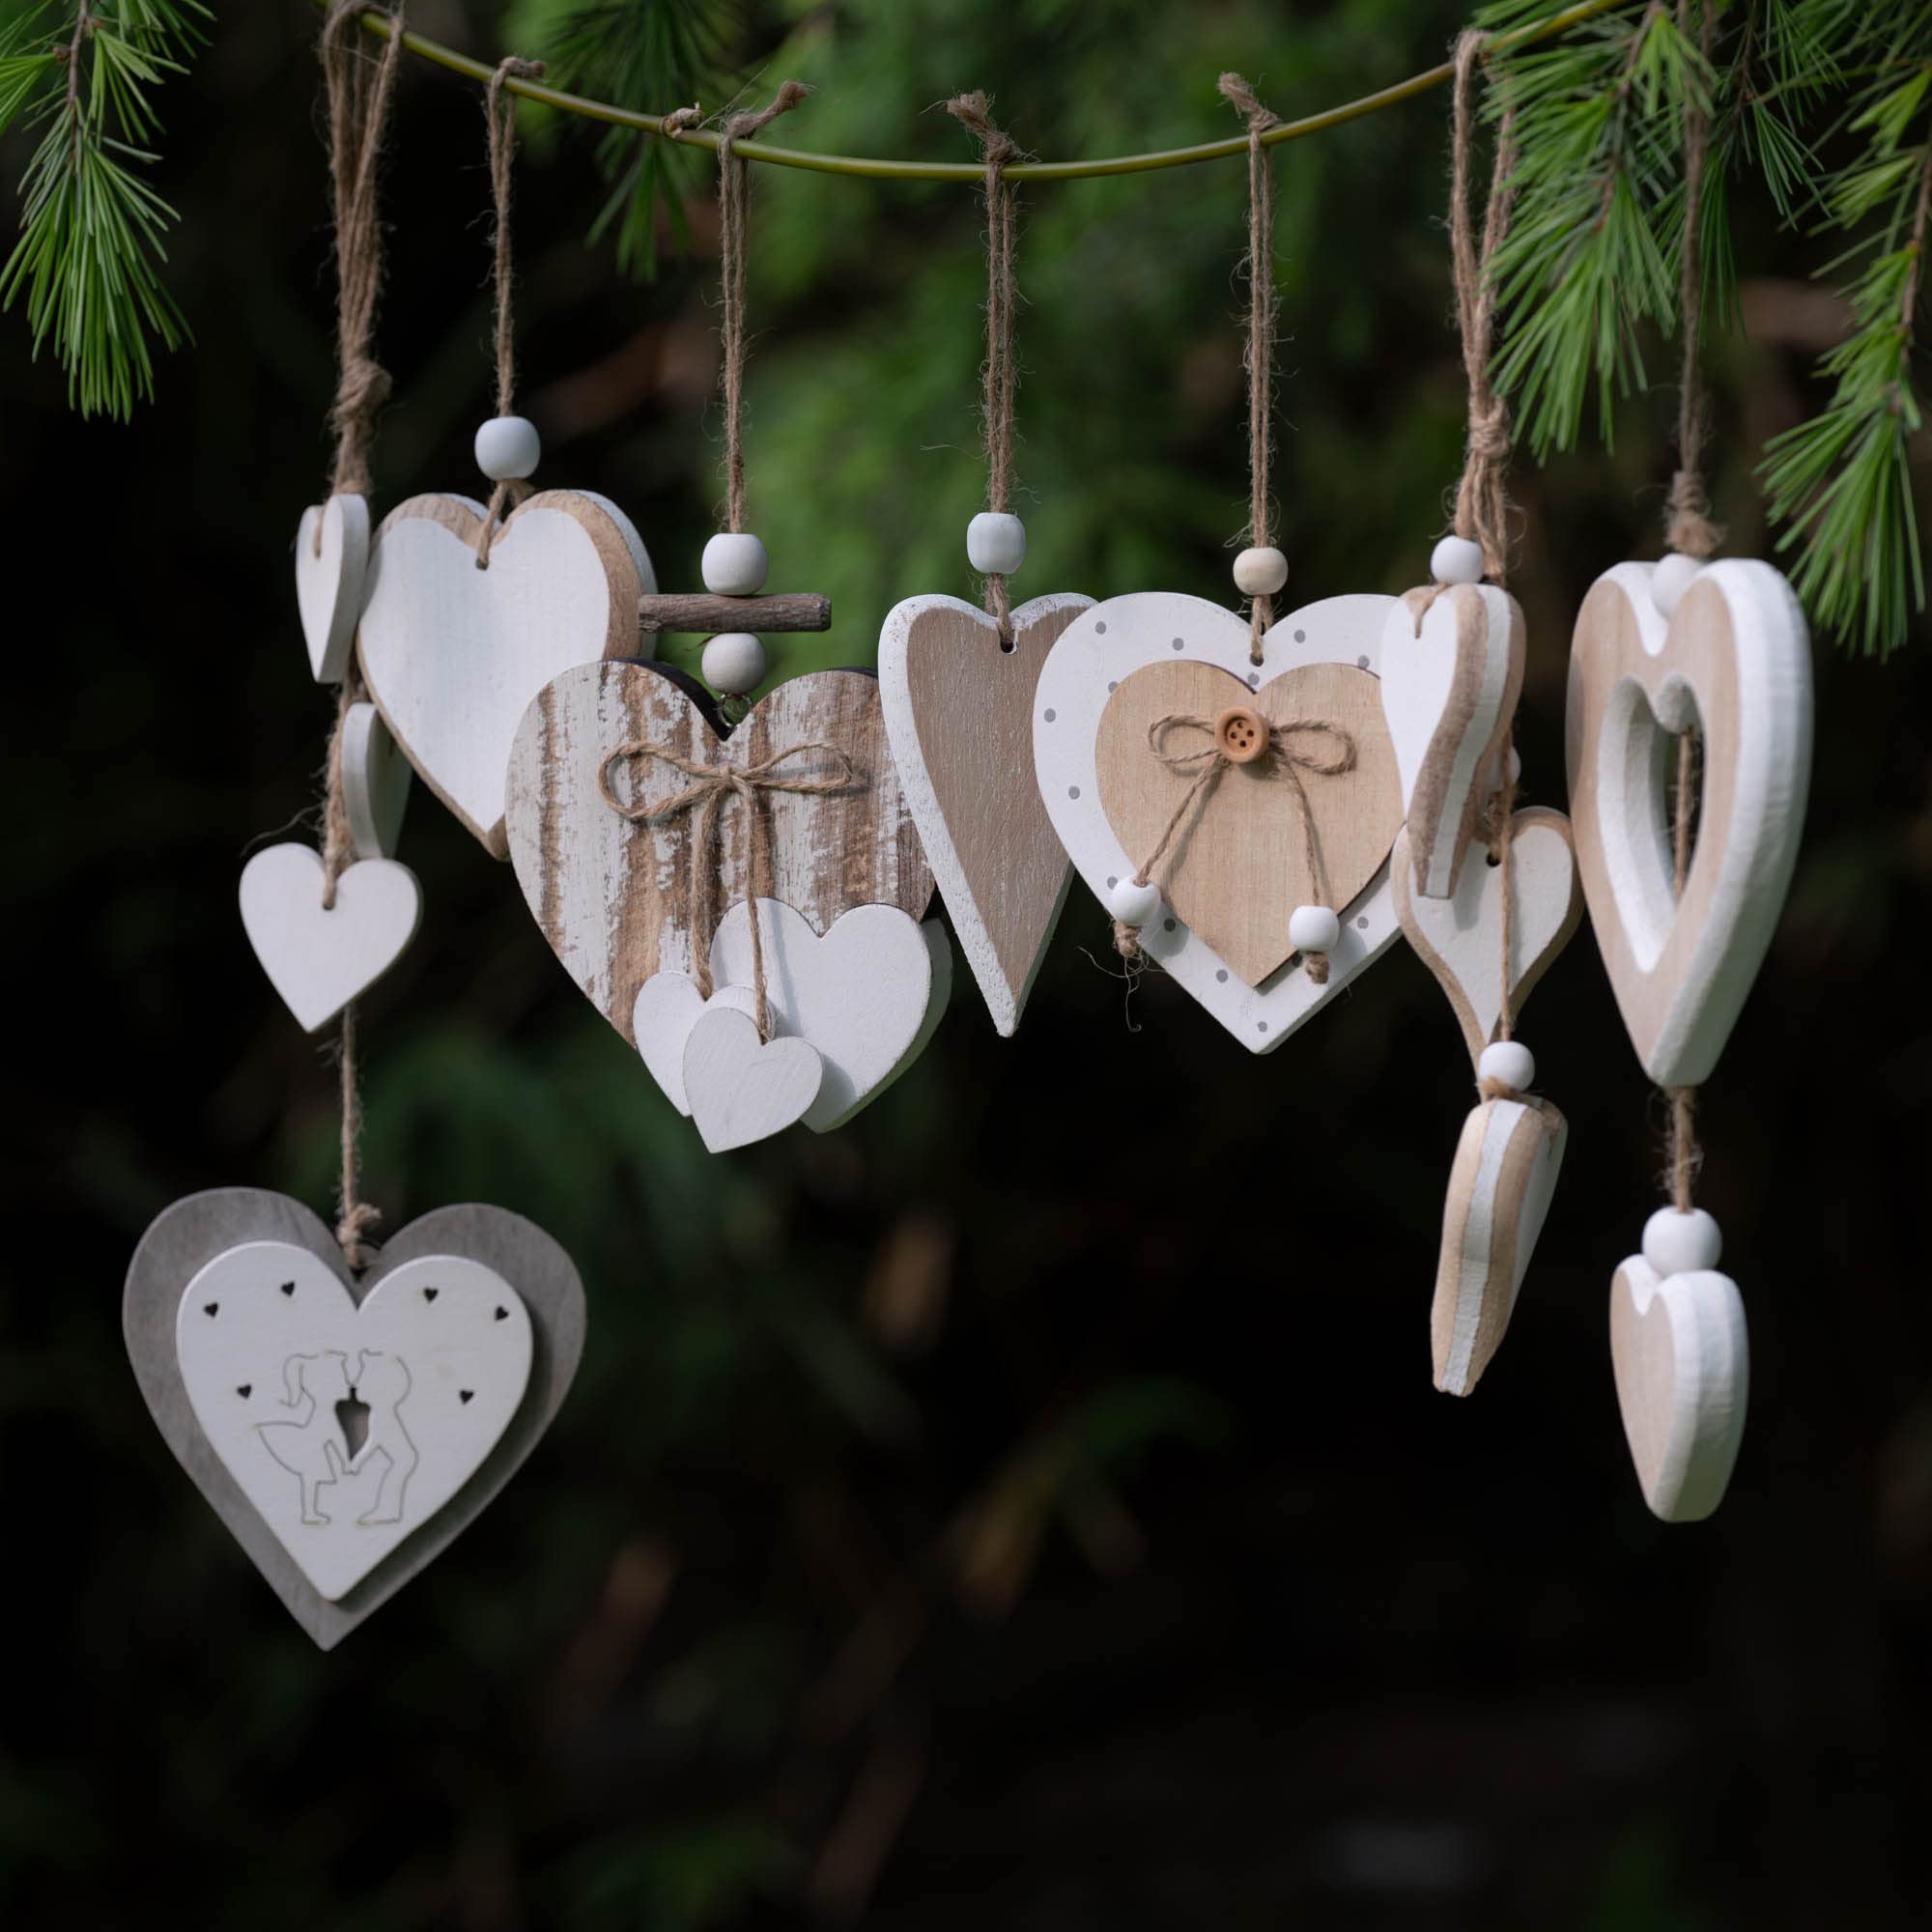 Sun&Beam Heart-shaped Wooden Decorative Hanging Handmade Hearts Ornaments for Wedding Party Valentine Christmas Home Decoration Car Décor (D-#1, 1Pcs)